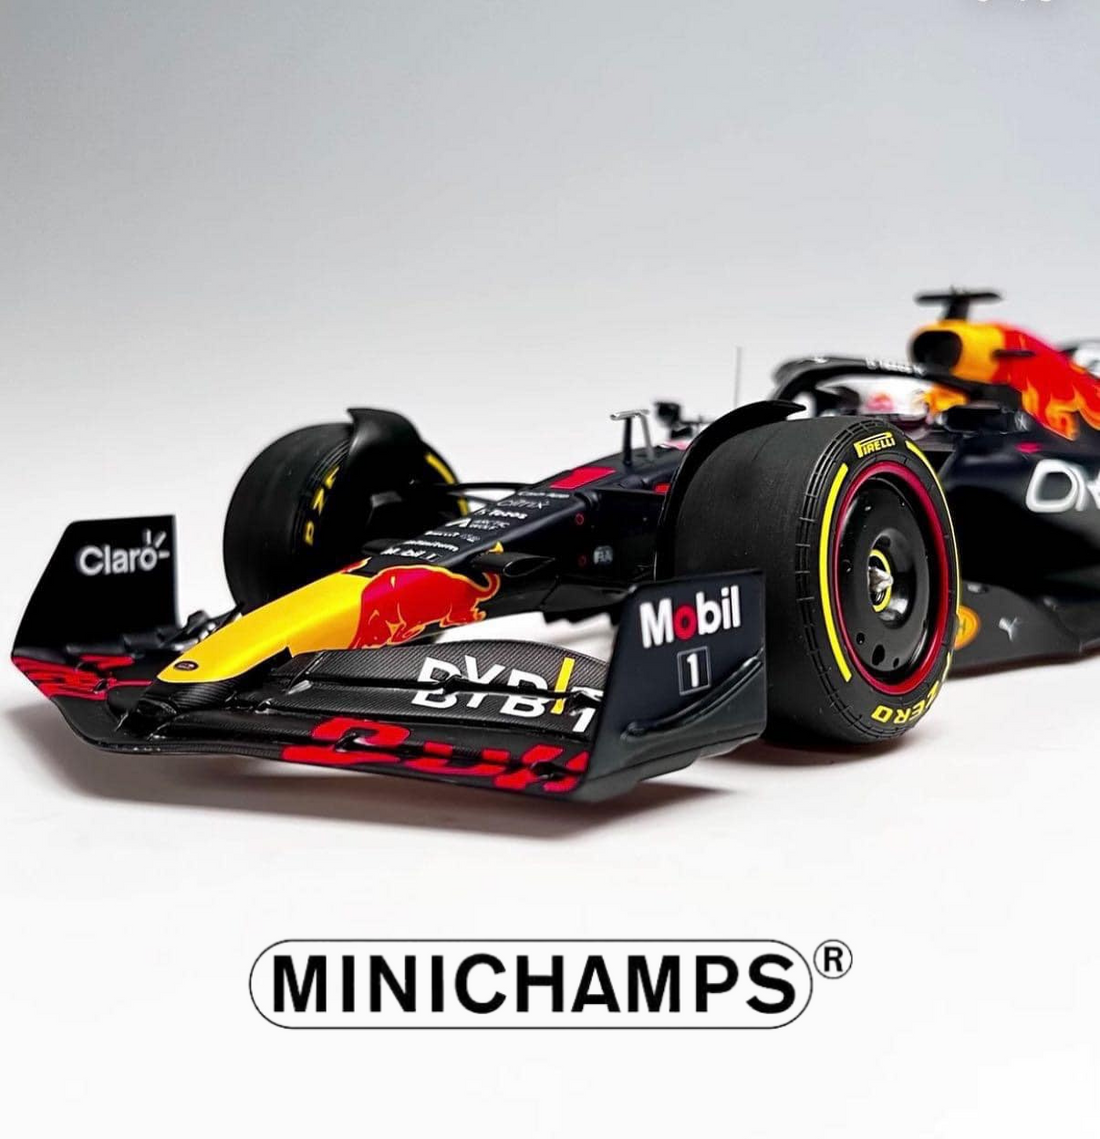 Red Bull RB18 Minichamps 1/18 model first pictures!